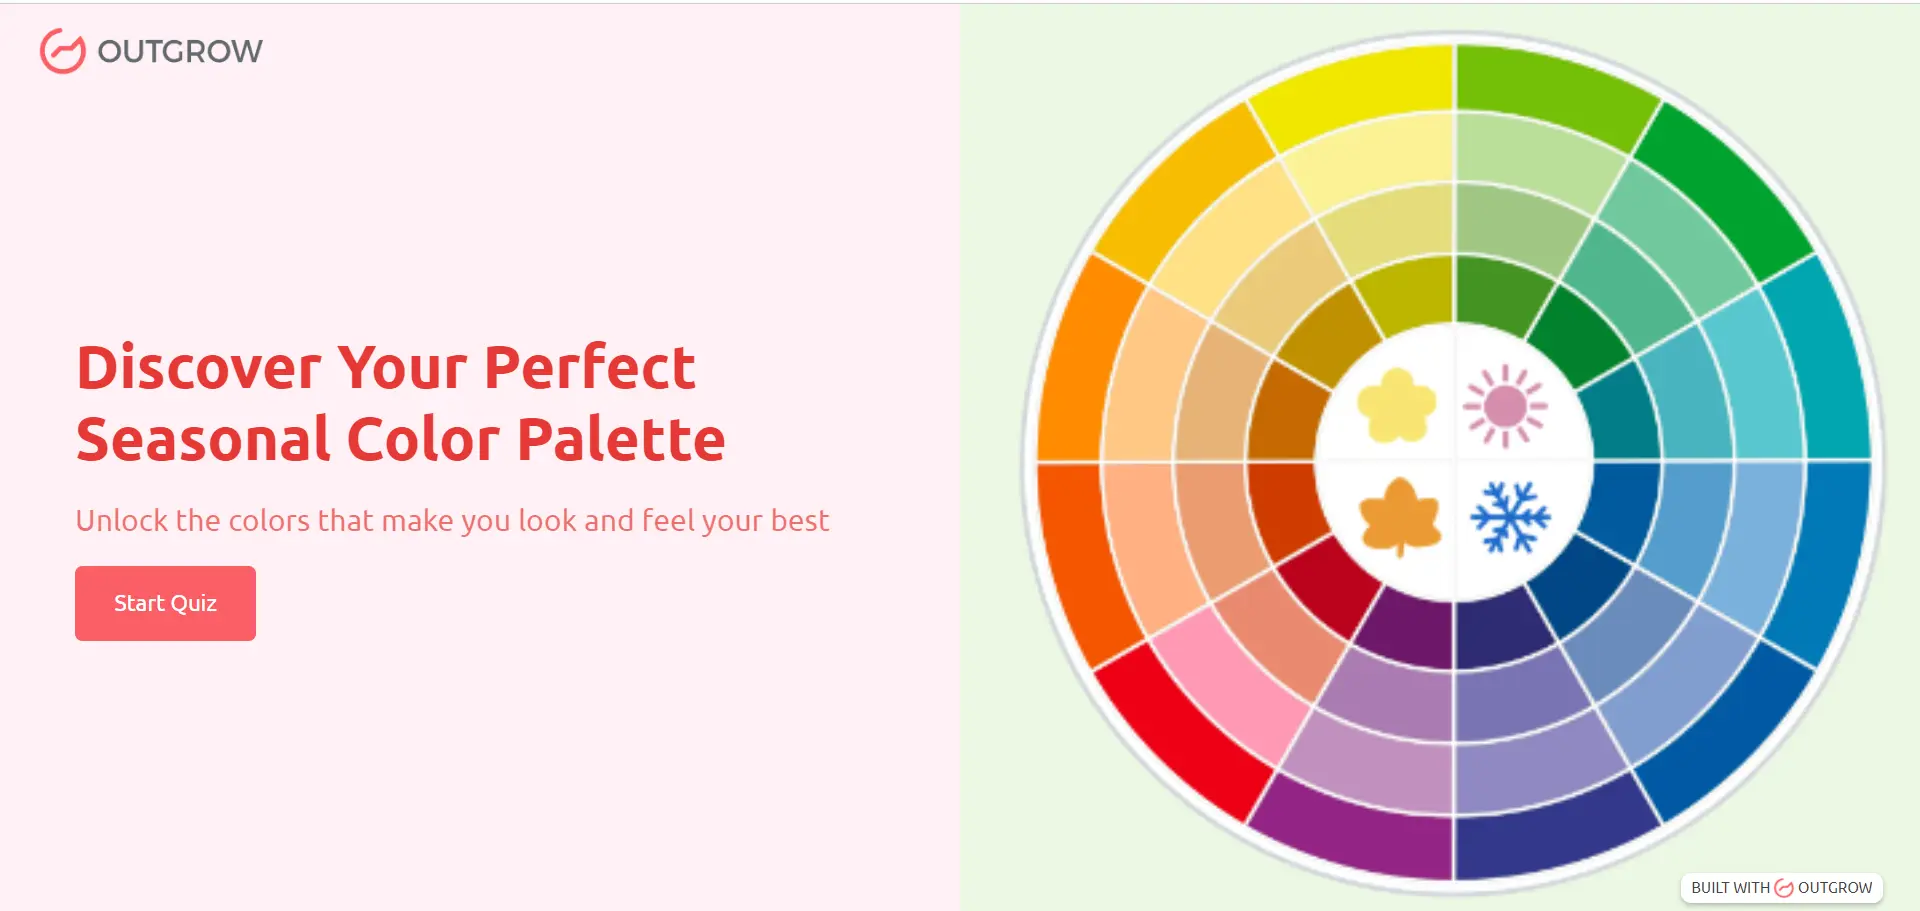 Discover Your Perfect Seasonal Color Palette